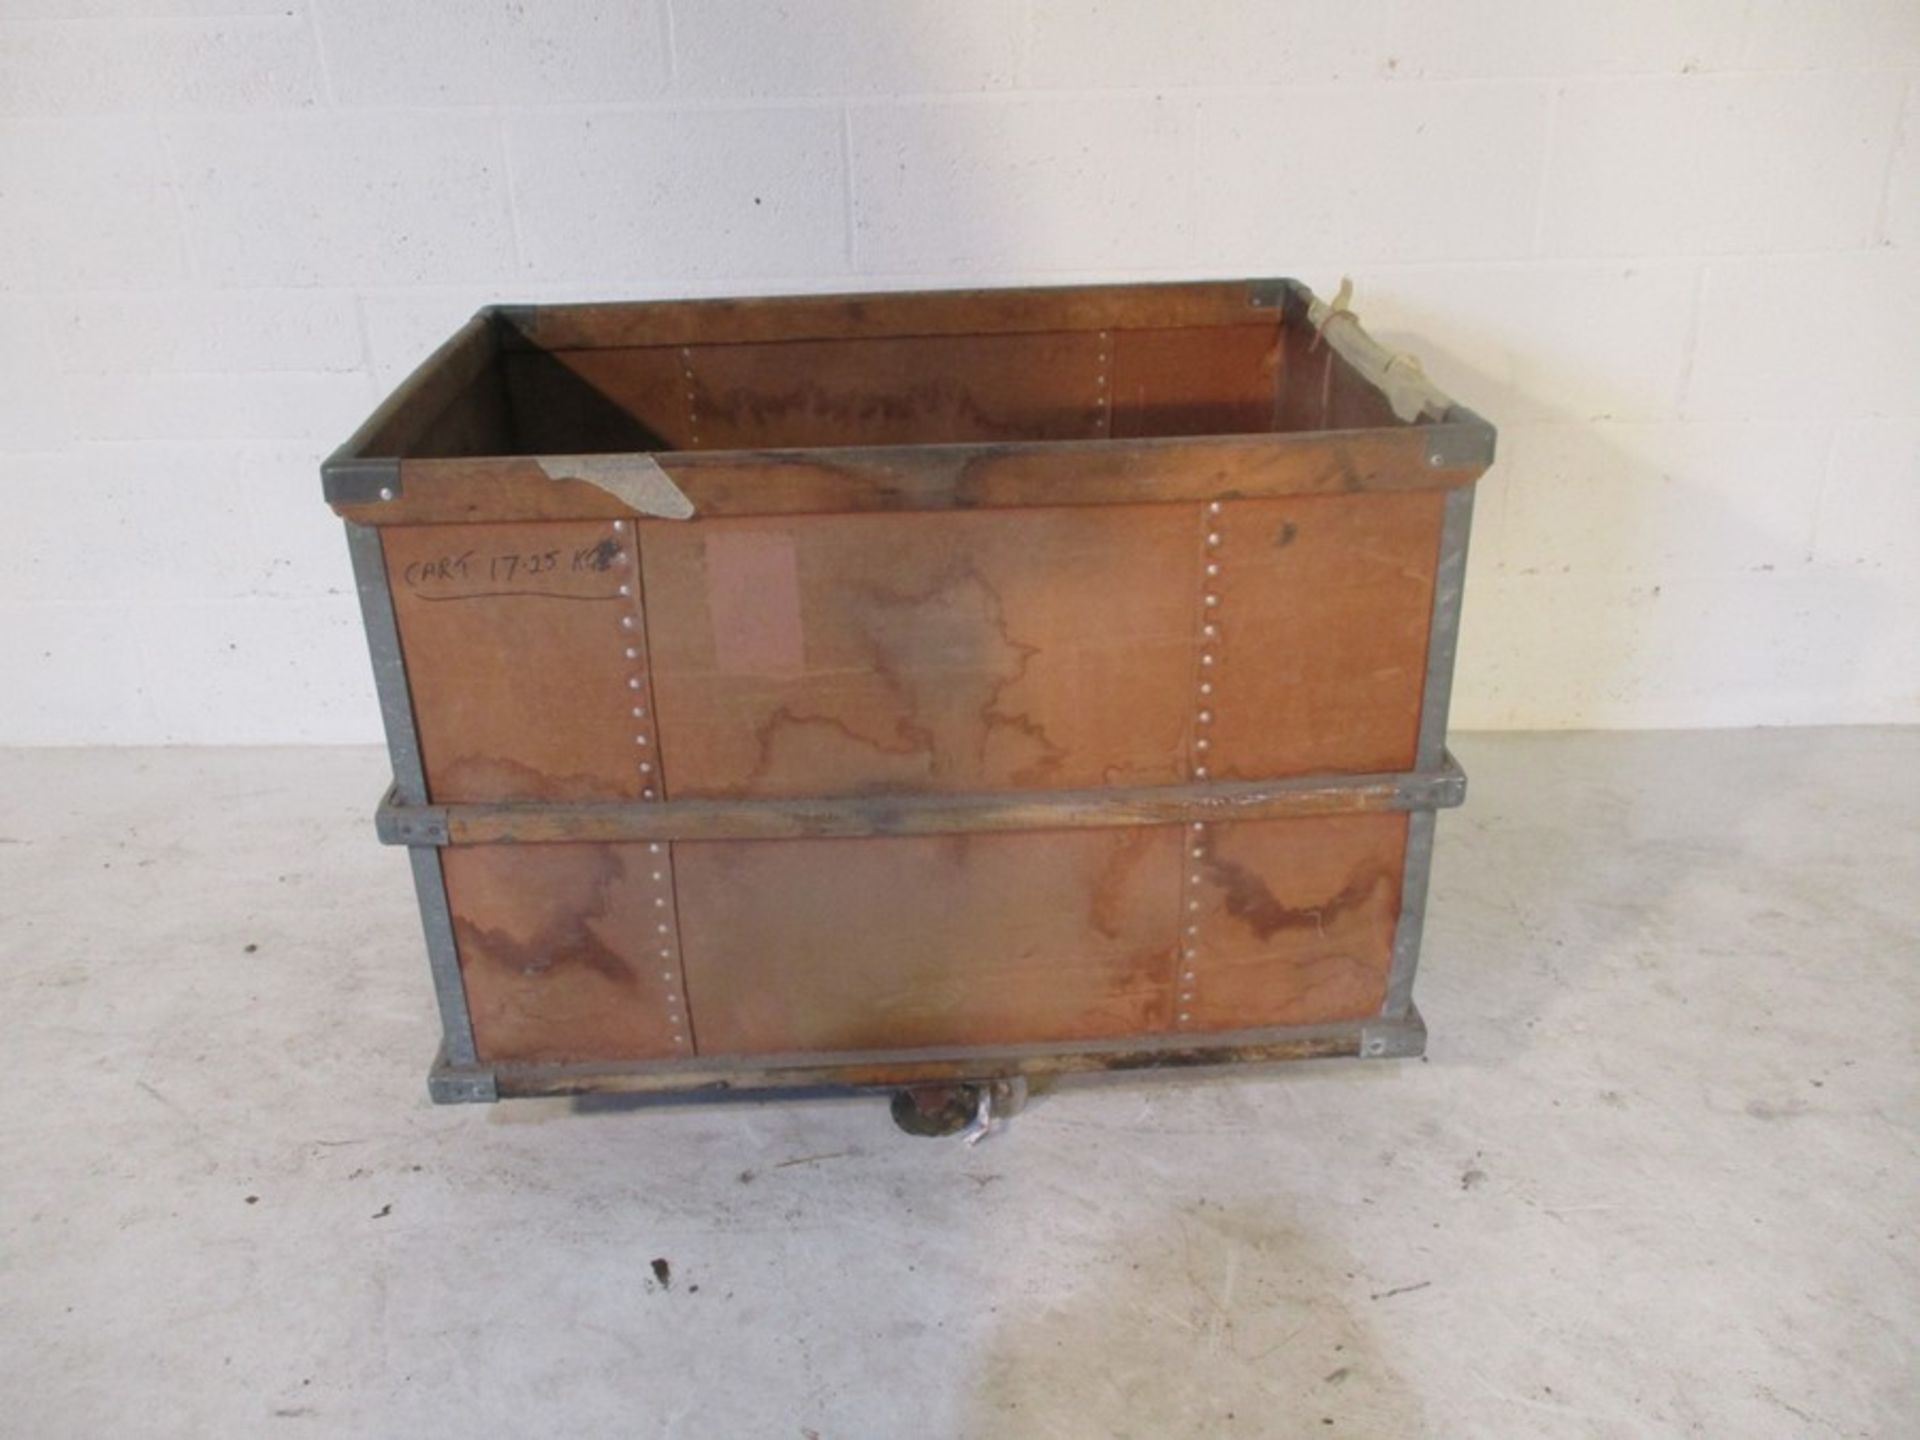 An industrial storage trolley with wooden edging - length 94cm, width 64cm